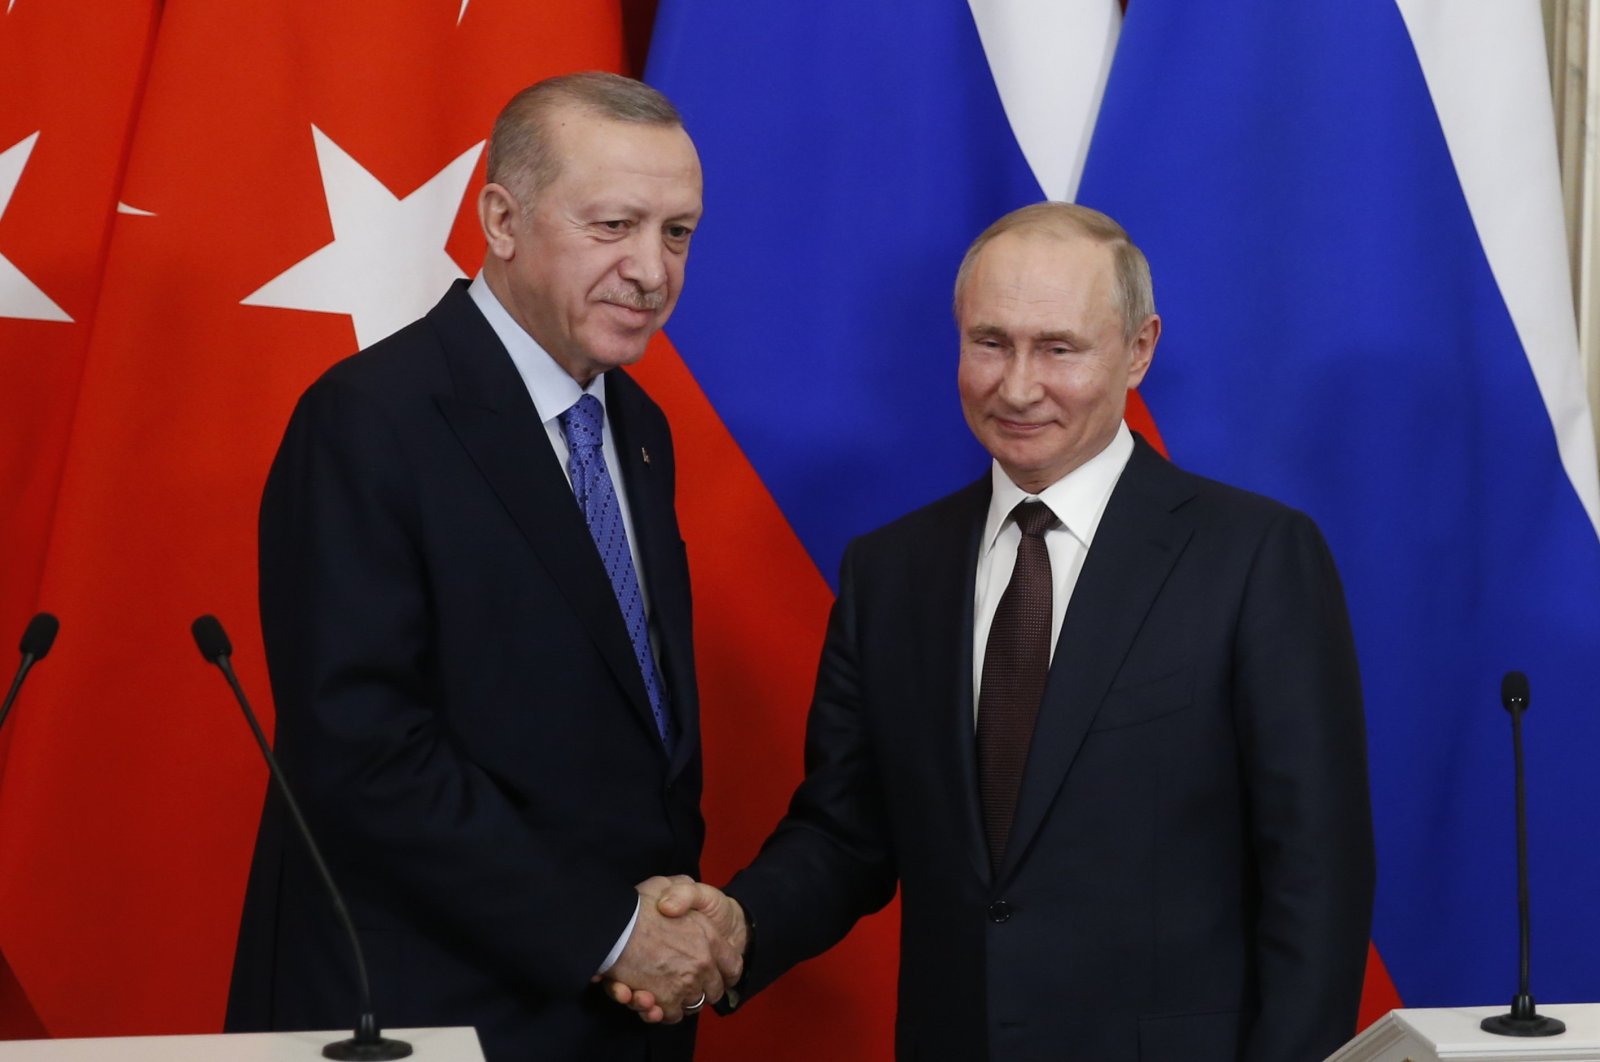 This file photo dated March 5, 2020 shows President Recep Tayyip Erdoğan (L) and his Russian counterpart Vladimir Putin shake hands following a summit on Idlib in Moscow. (AA Photo)